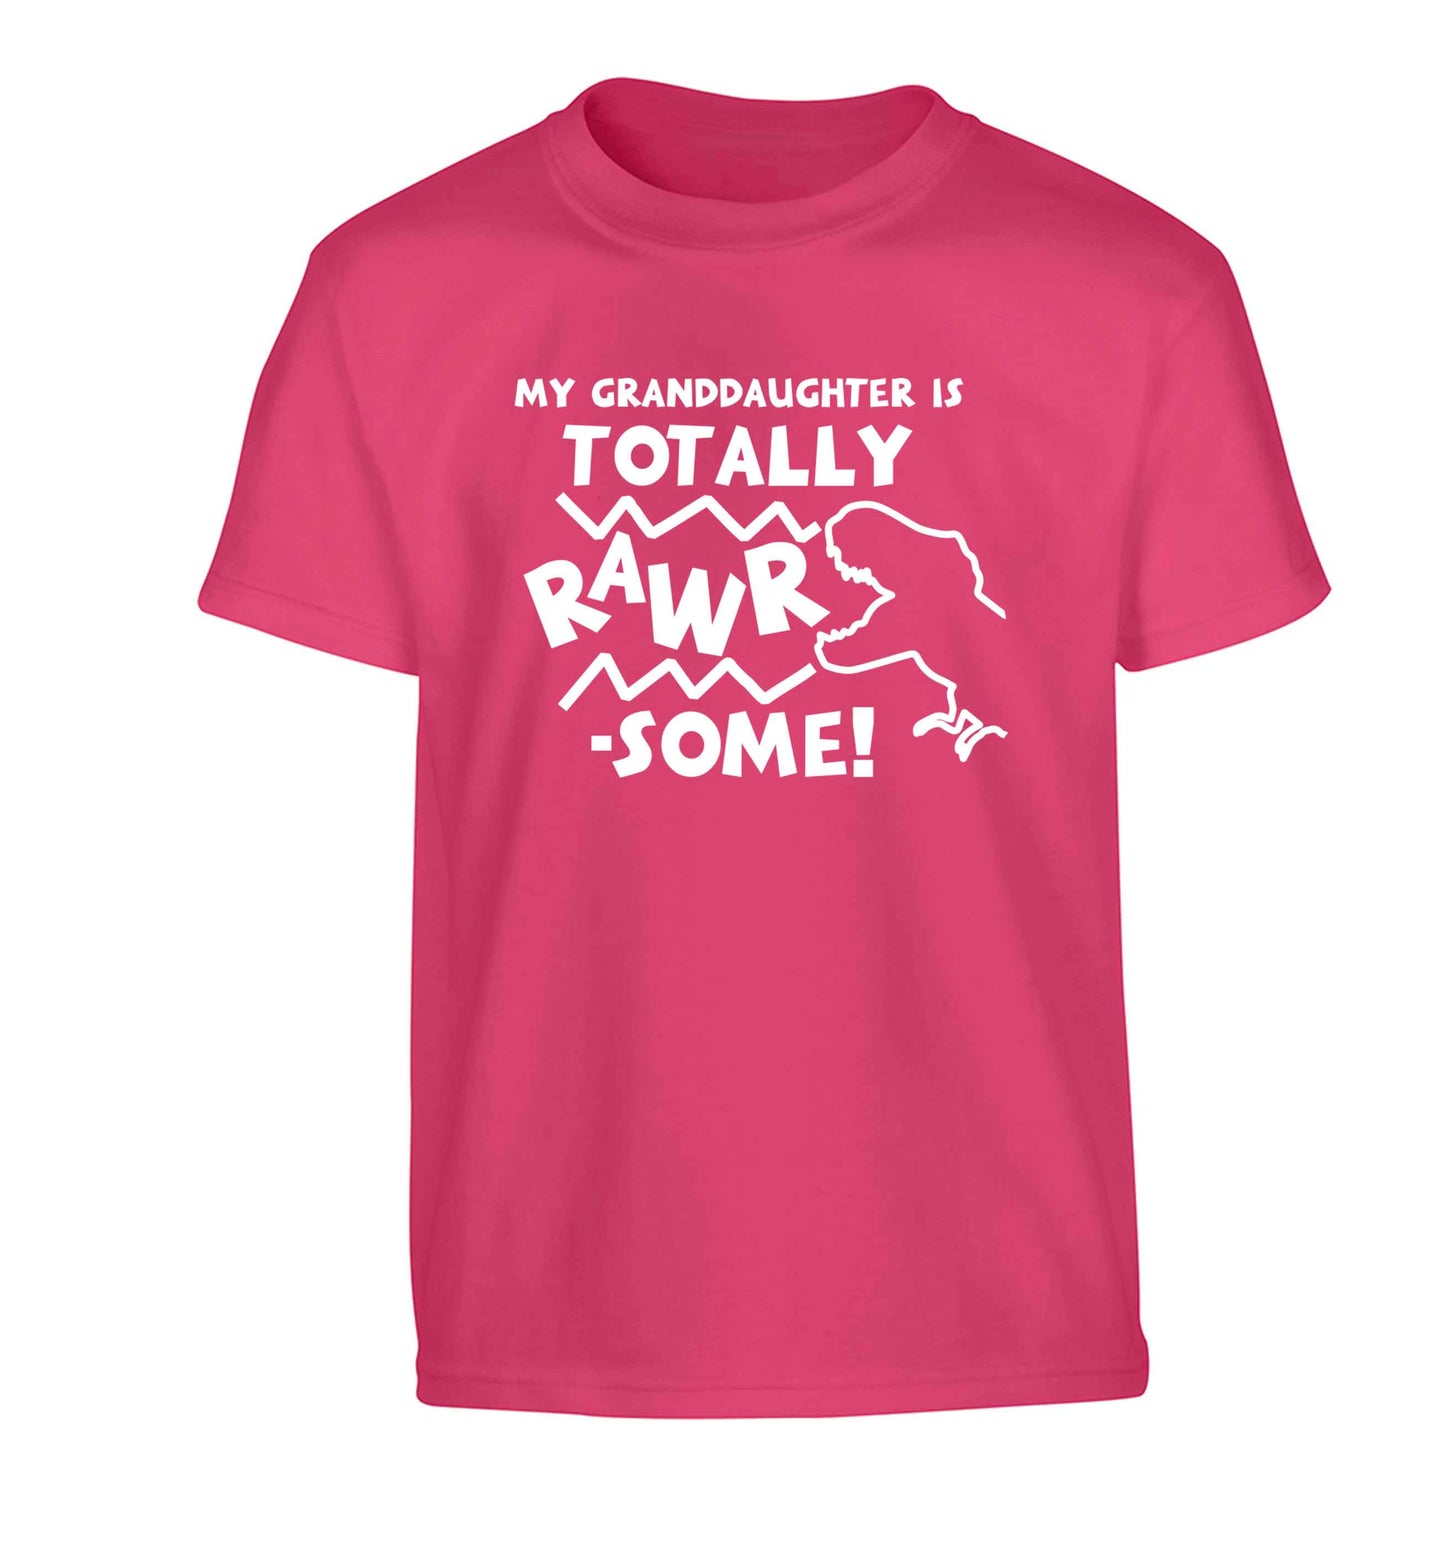 My granddaughter is totally rawrsome Children's pink Tshirt 12-13 Years